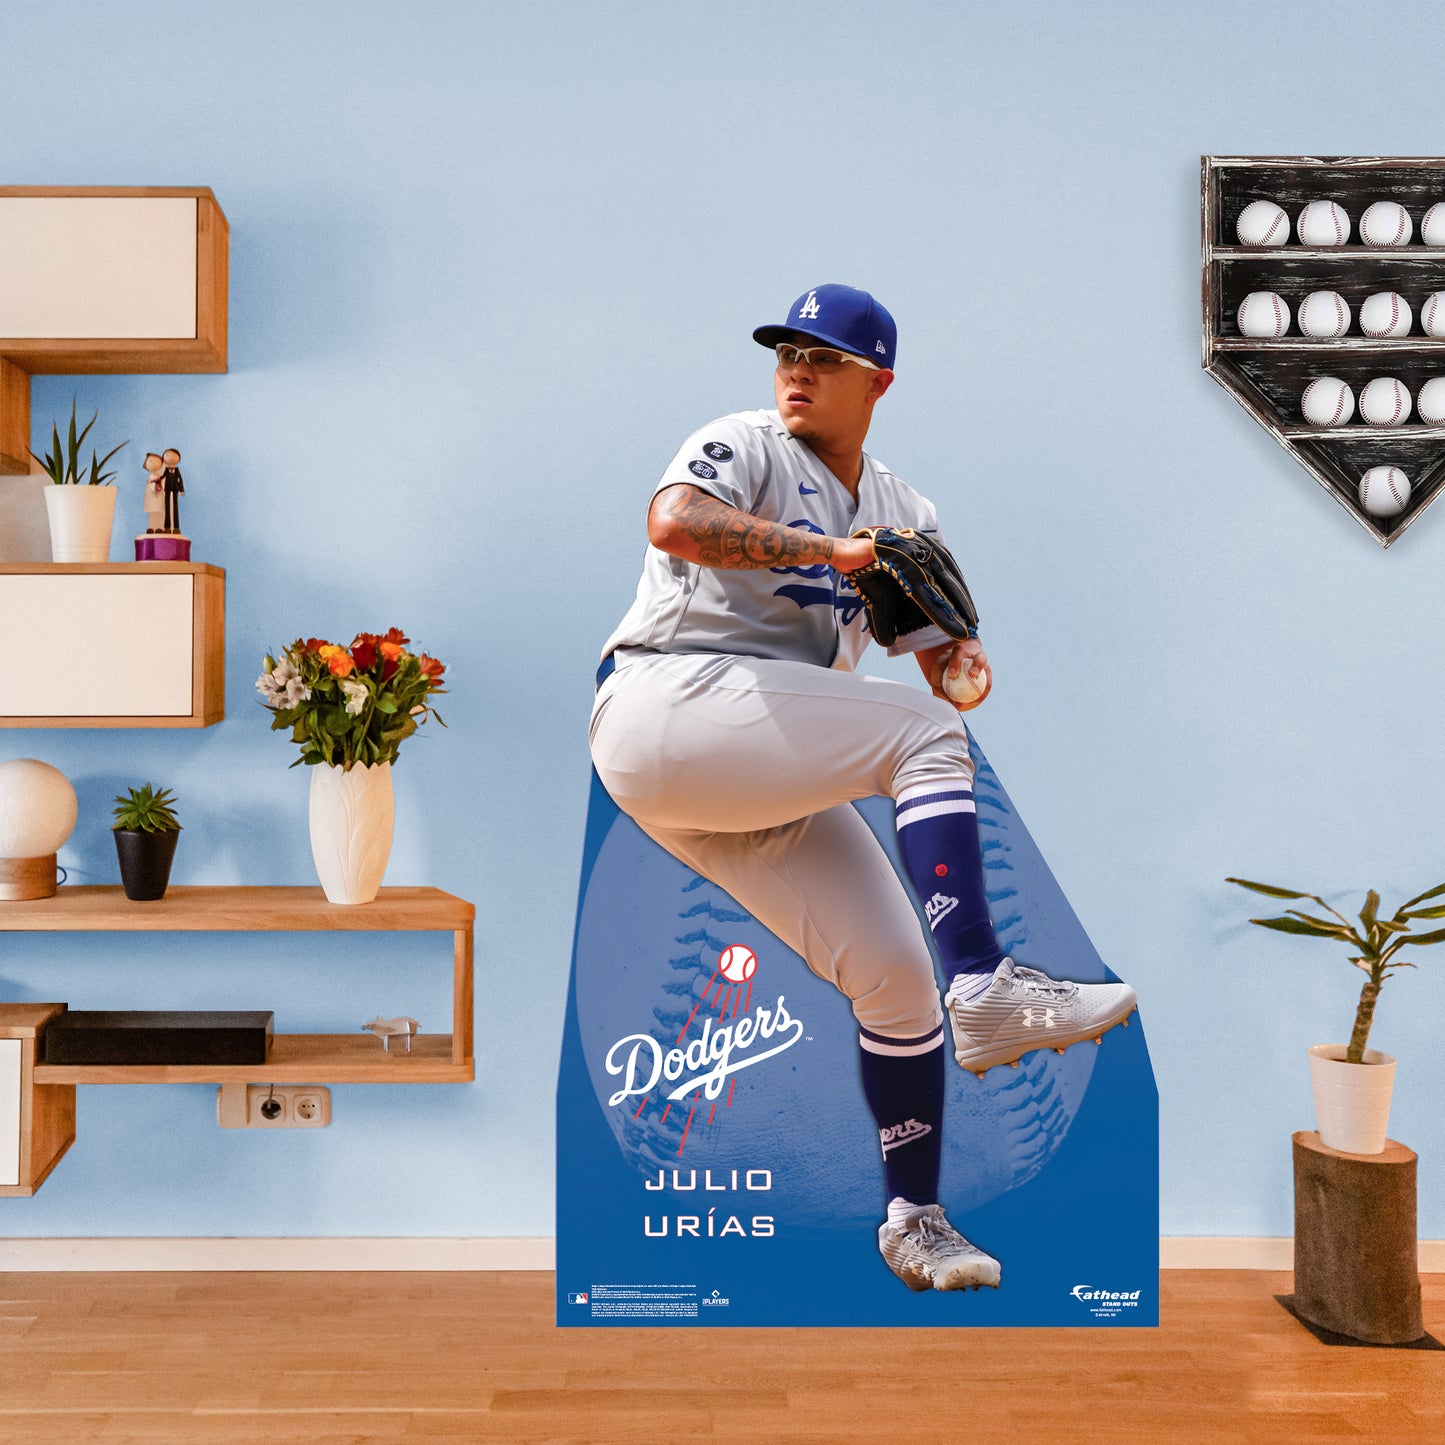 Los Angeles Dodgers: Julio Urías 2022  Life-Size   Foam Core Cutout  - Officially Licensed MLB    Stand Out